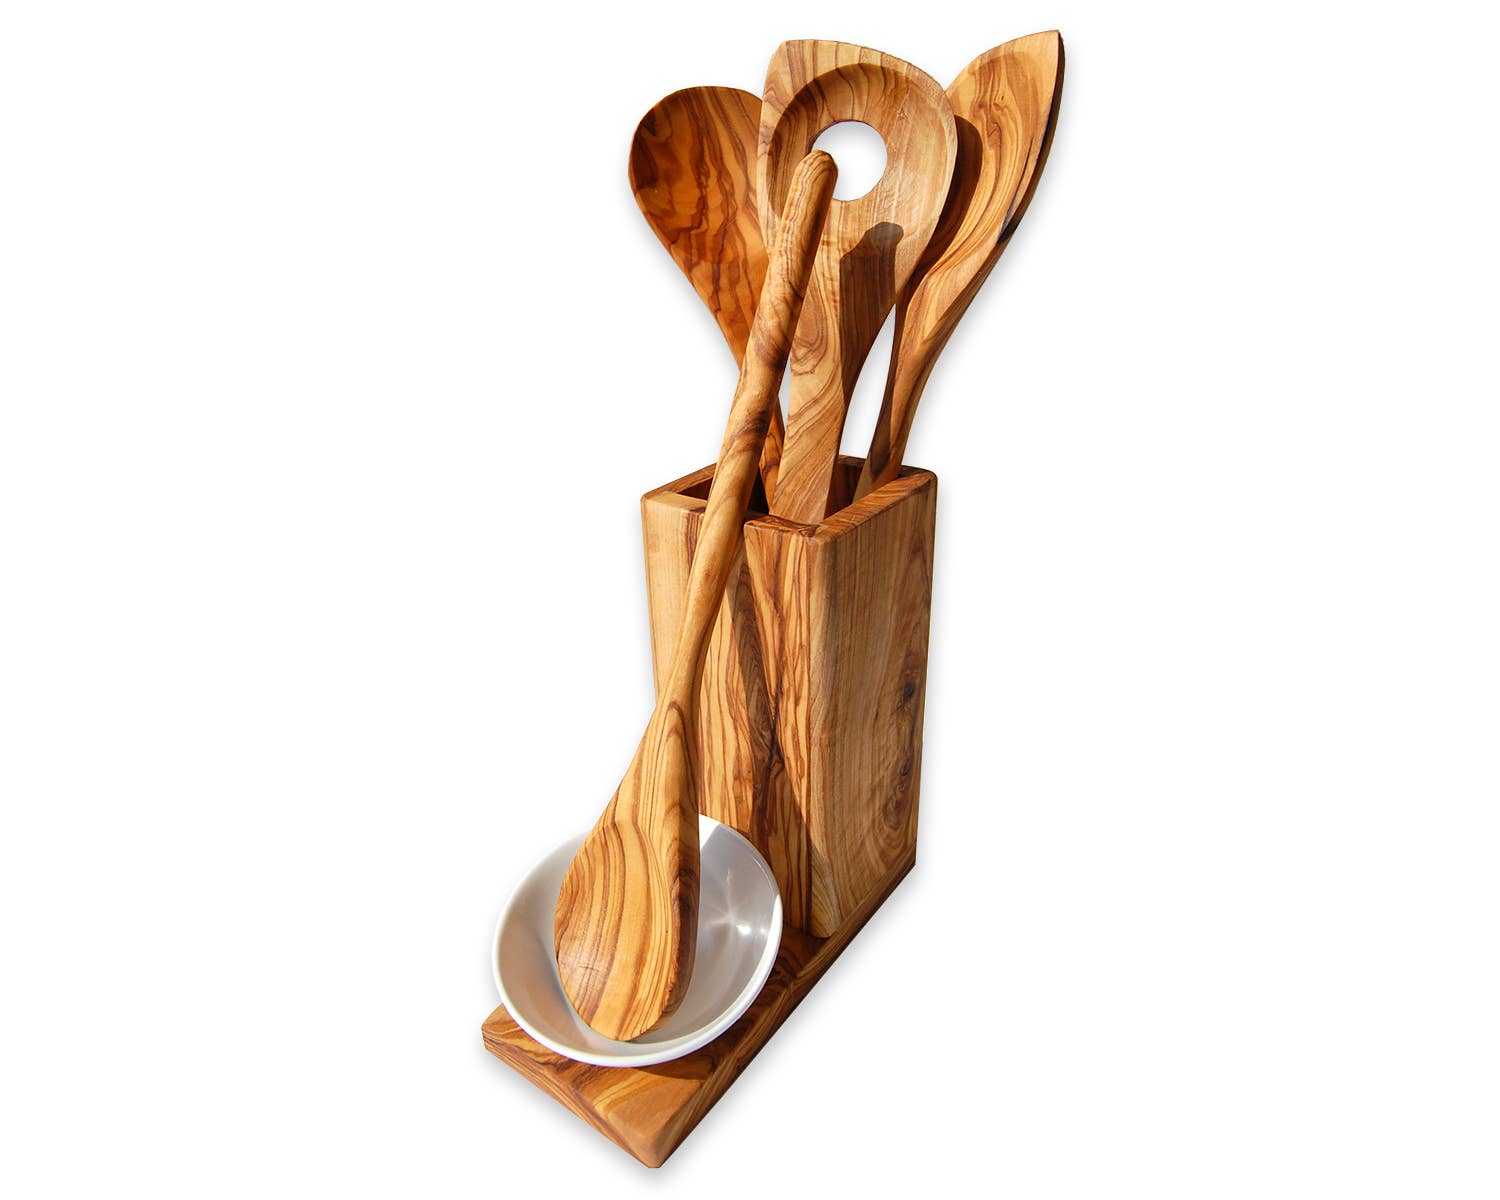 Season and Stir™ All-in one olive wood utensil cup including three cooking spoons - high quality